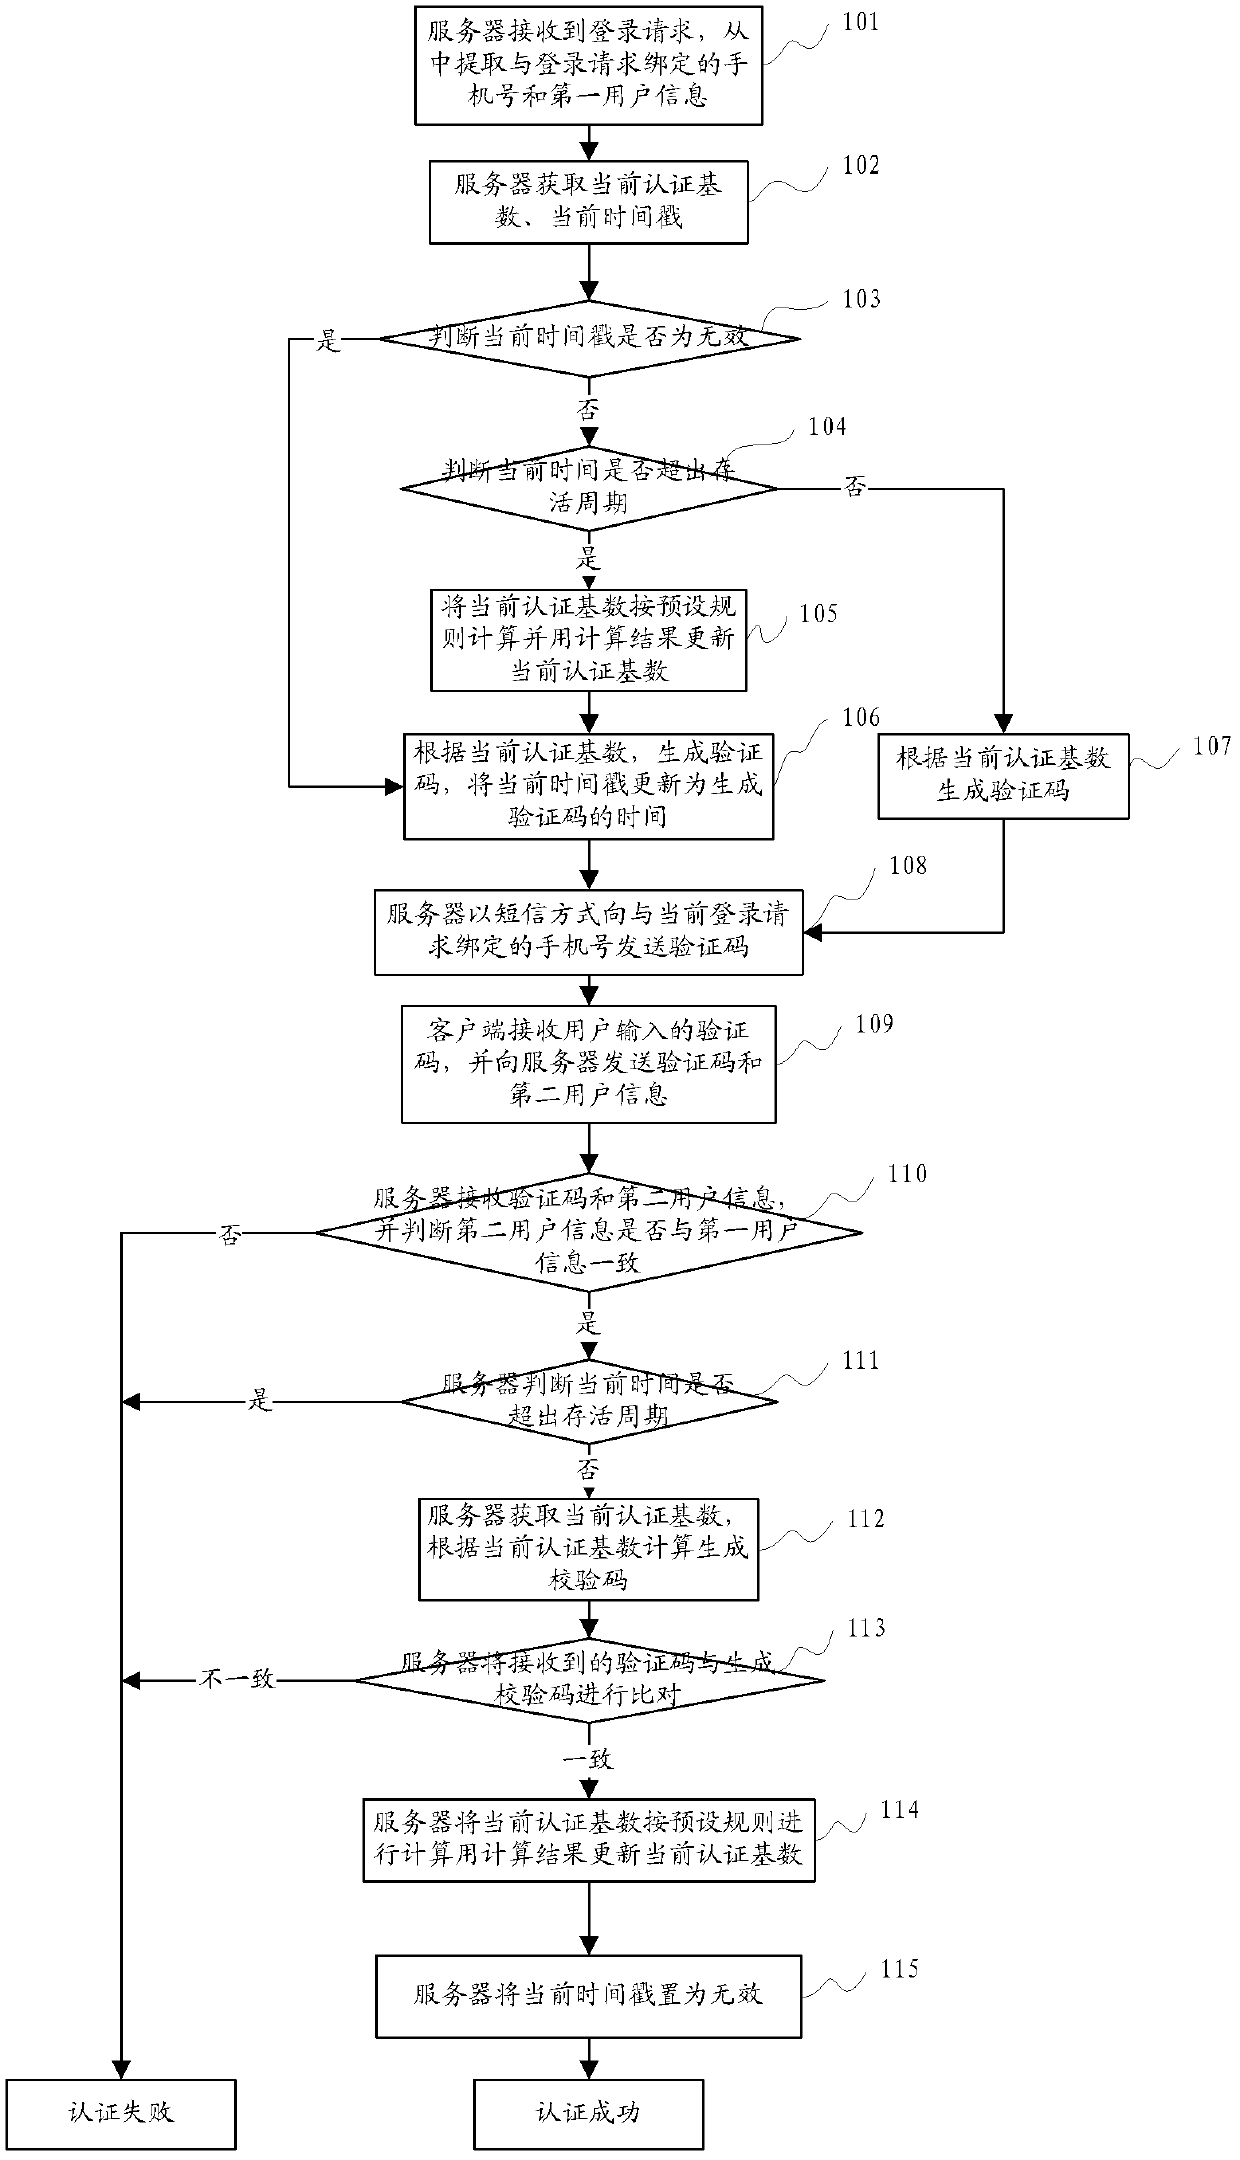 Short-message-based authentication method, system and device